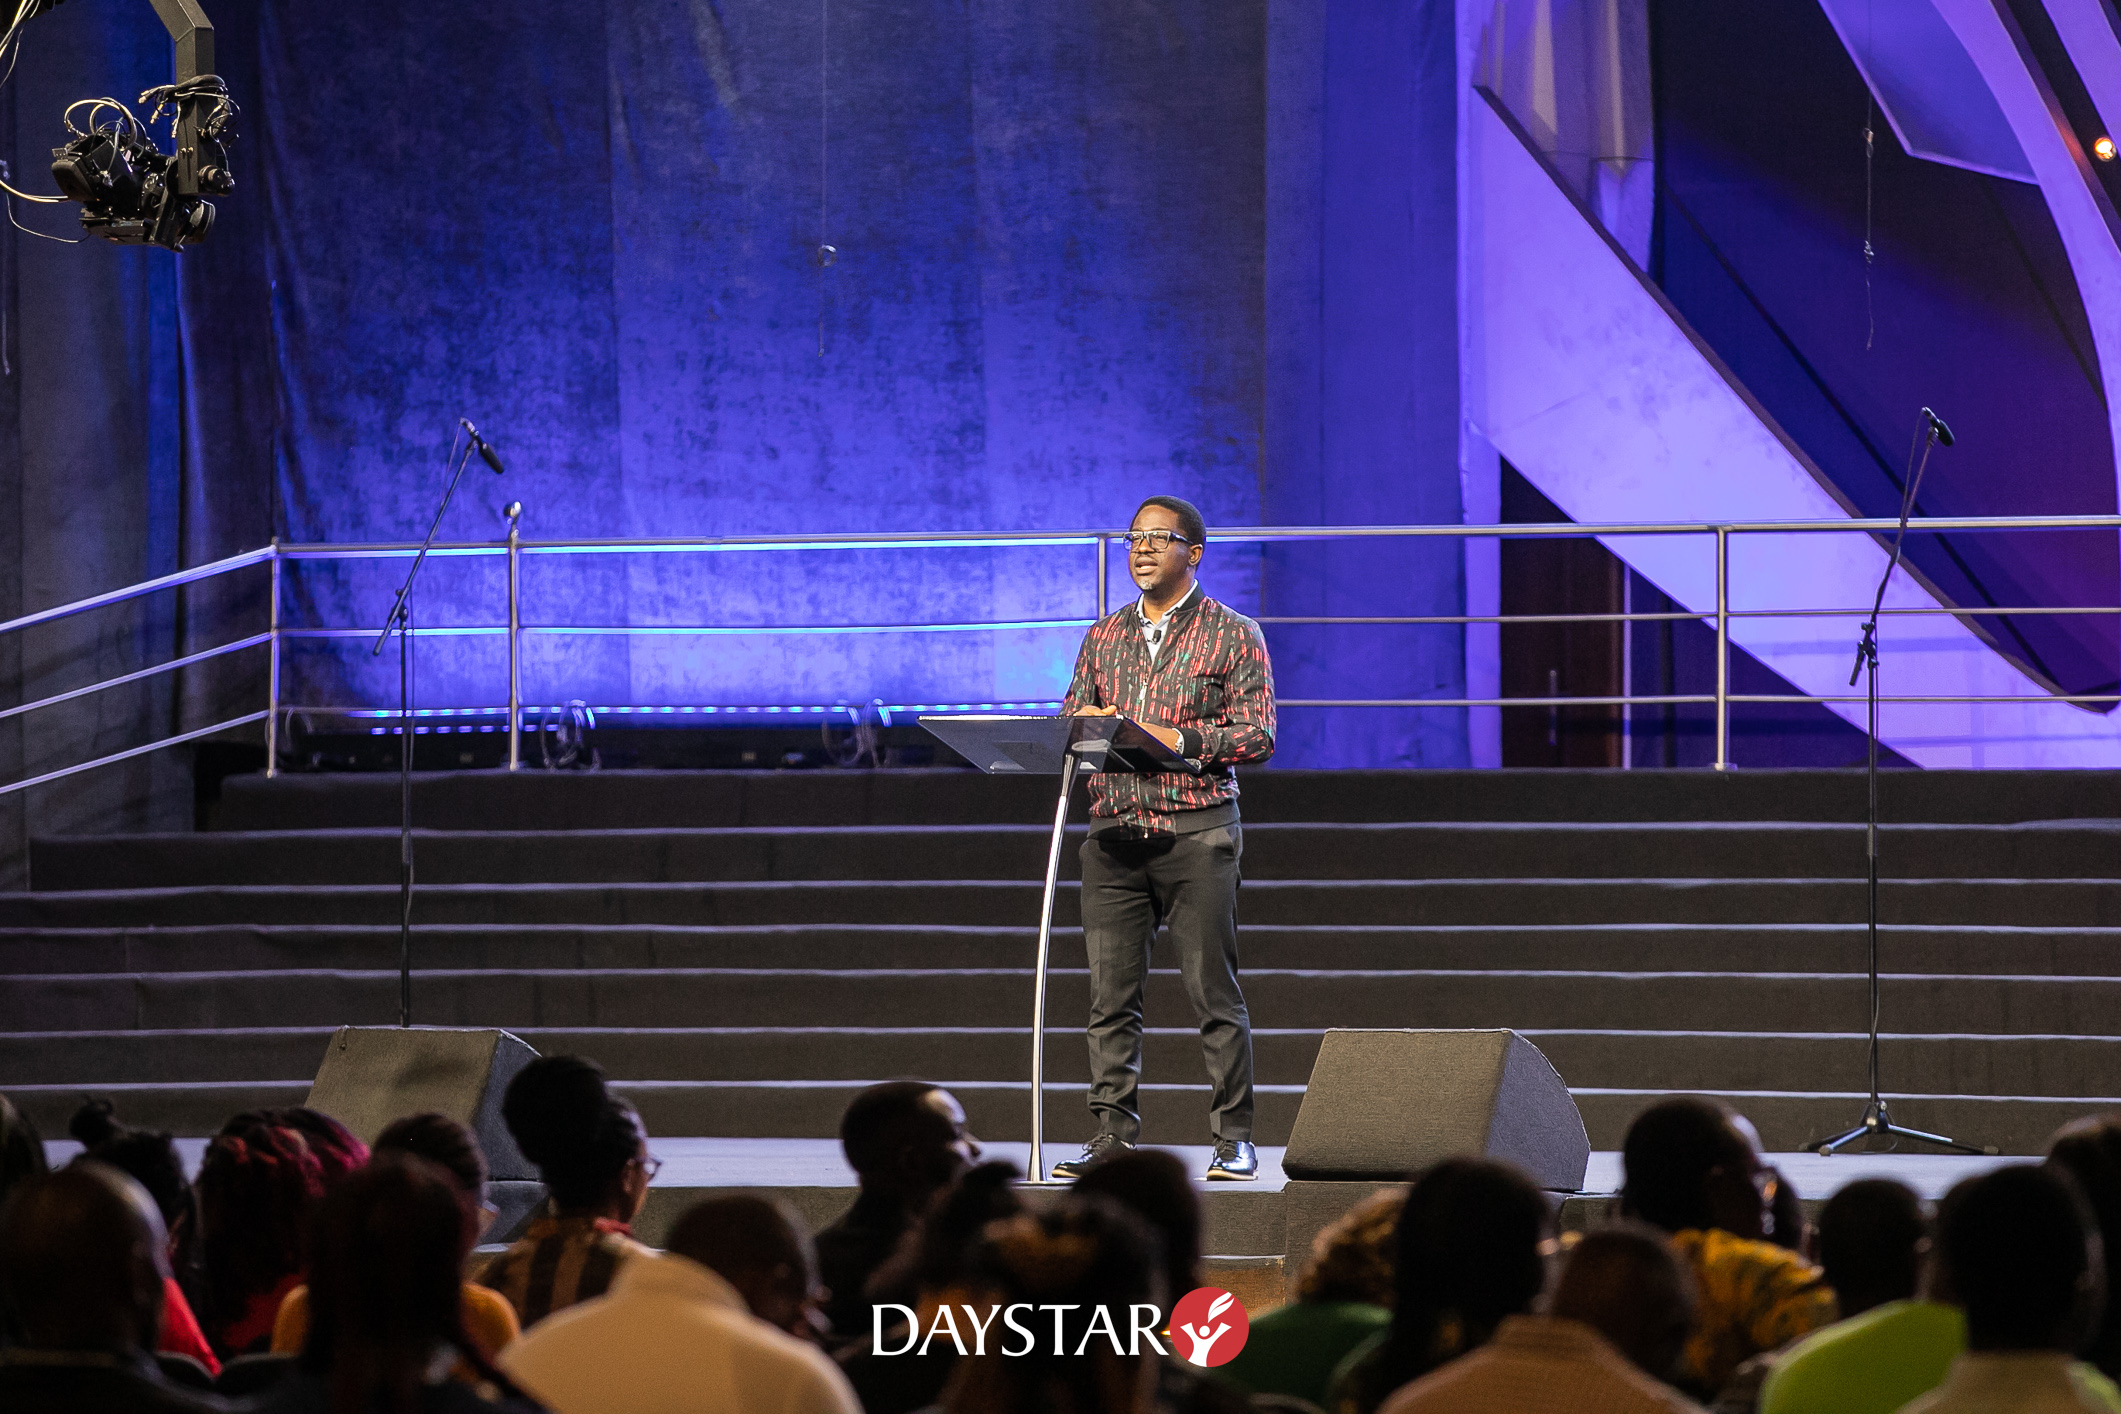 Blossoming In Love 2 | Daystar Christian Centre